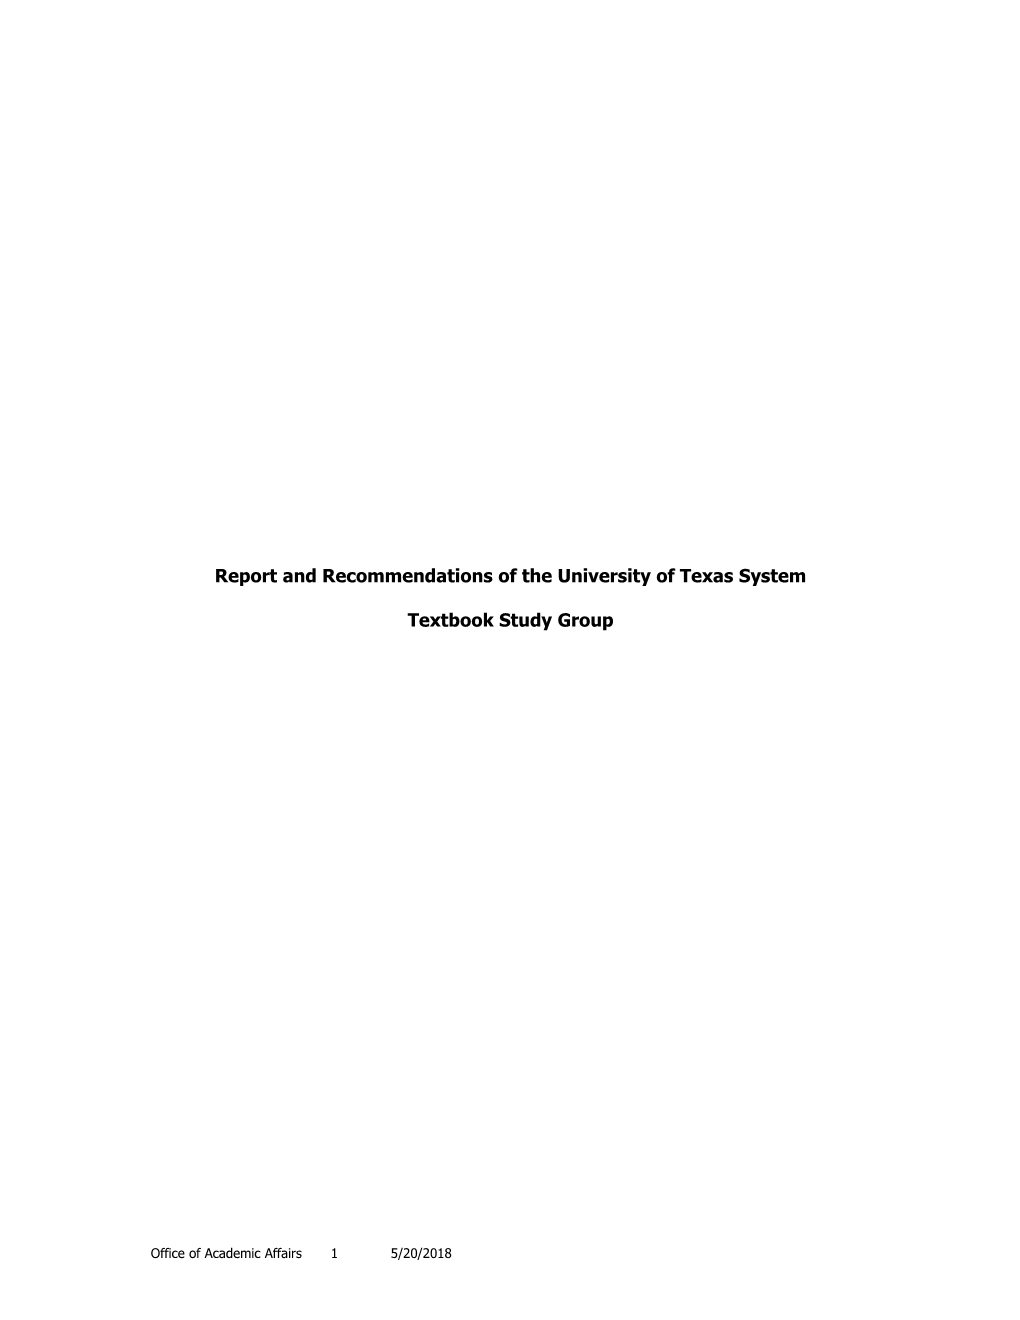 Report and Recommendations of the University of Texas System